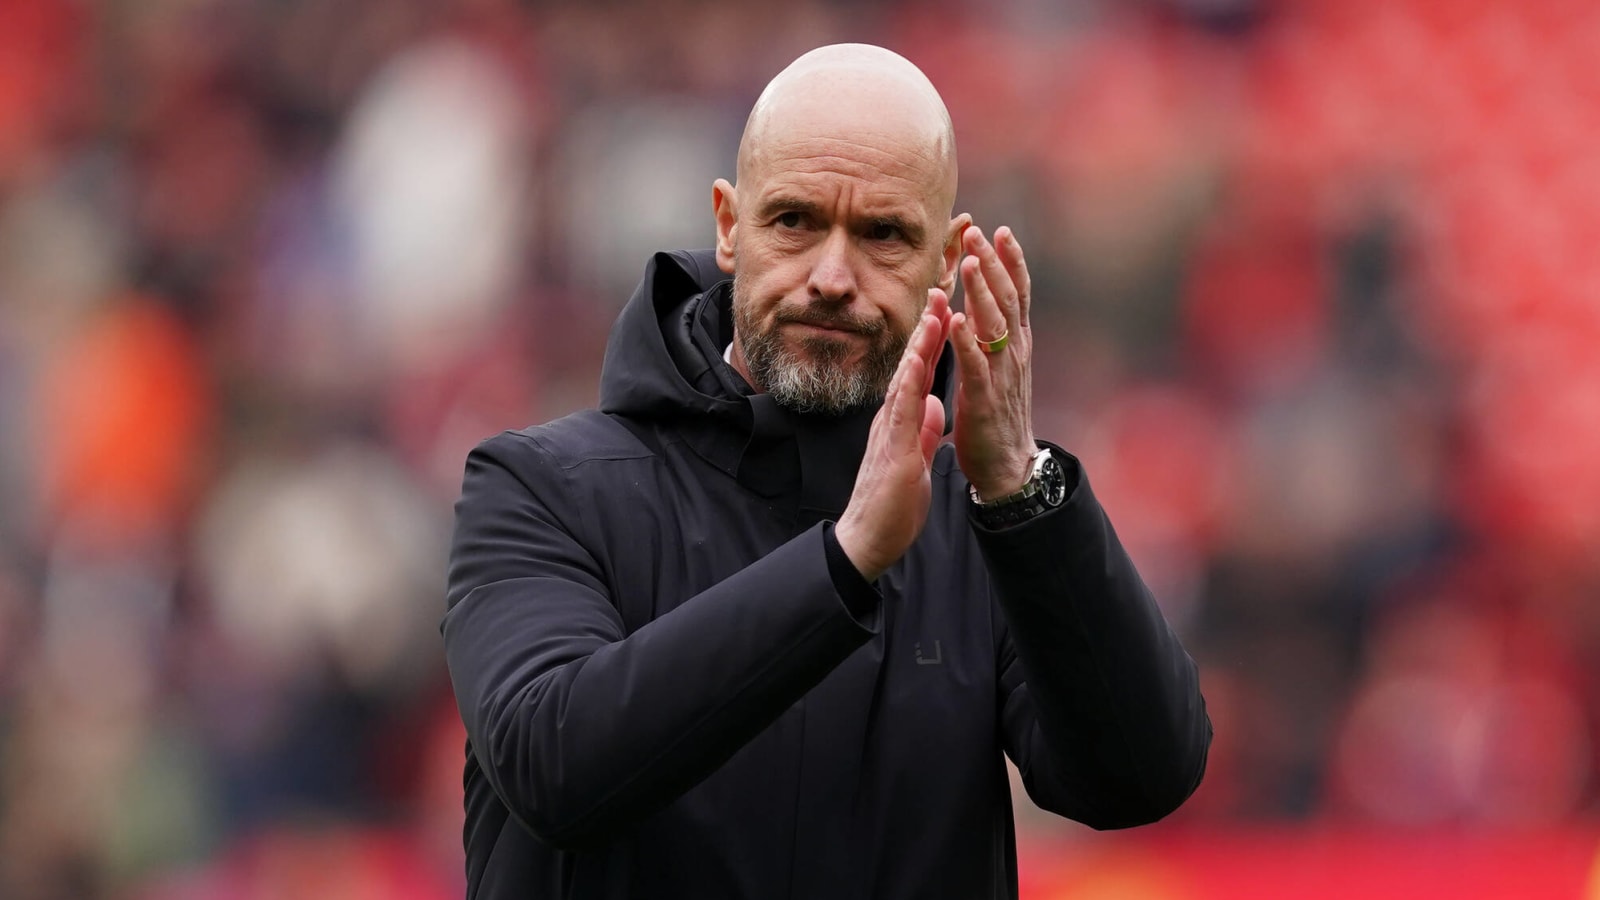 ‘Fans have to be patient’ – Andy Mitten reflects on the mood at Manchester United amid Ten Hag uncertainty